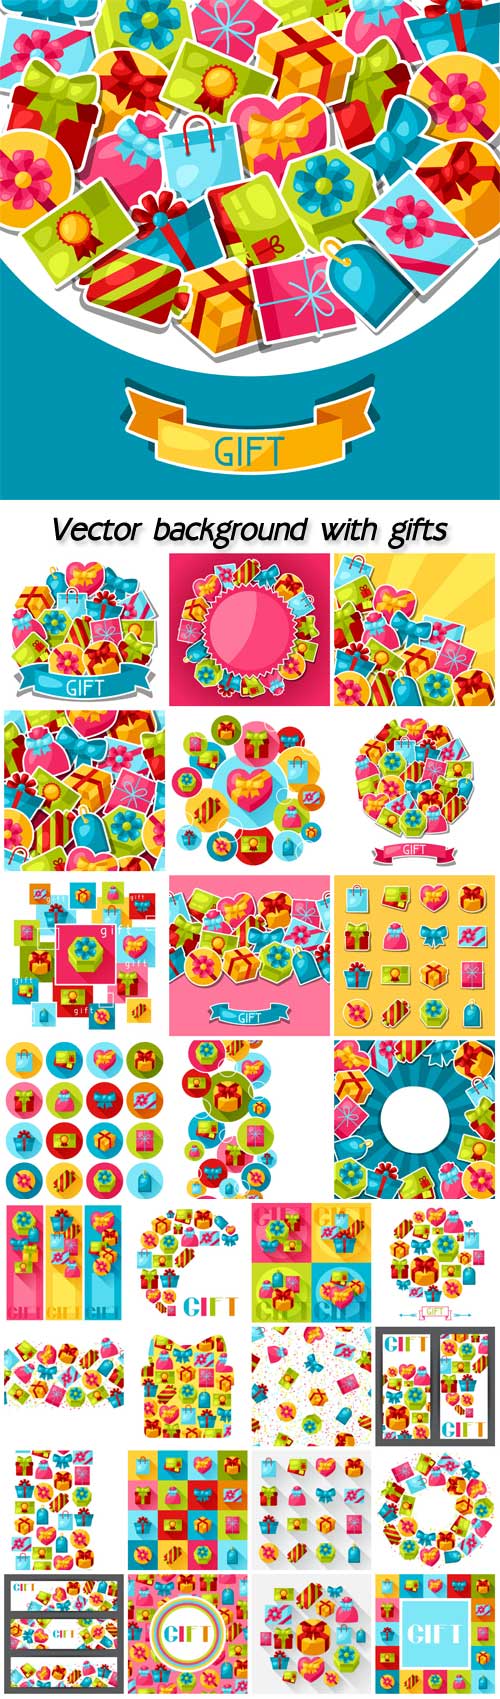 Vector background with gifts